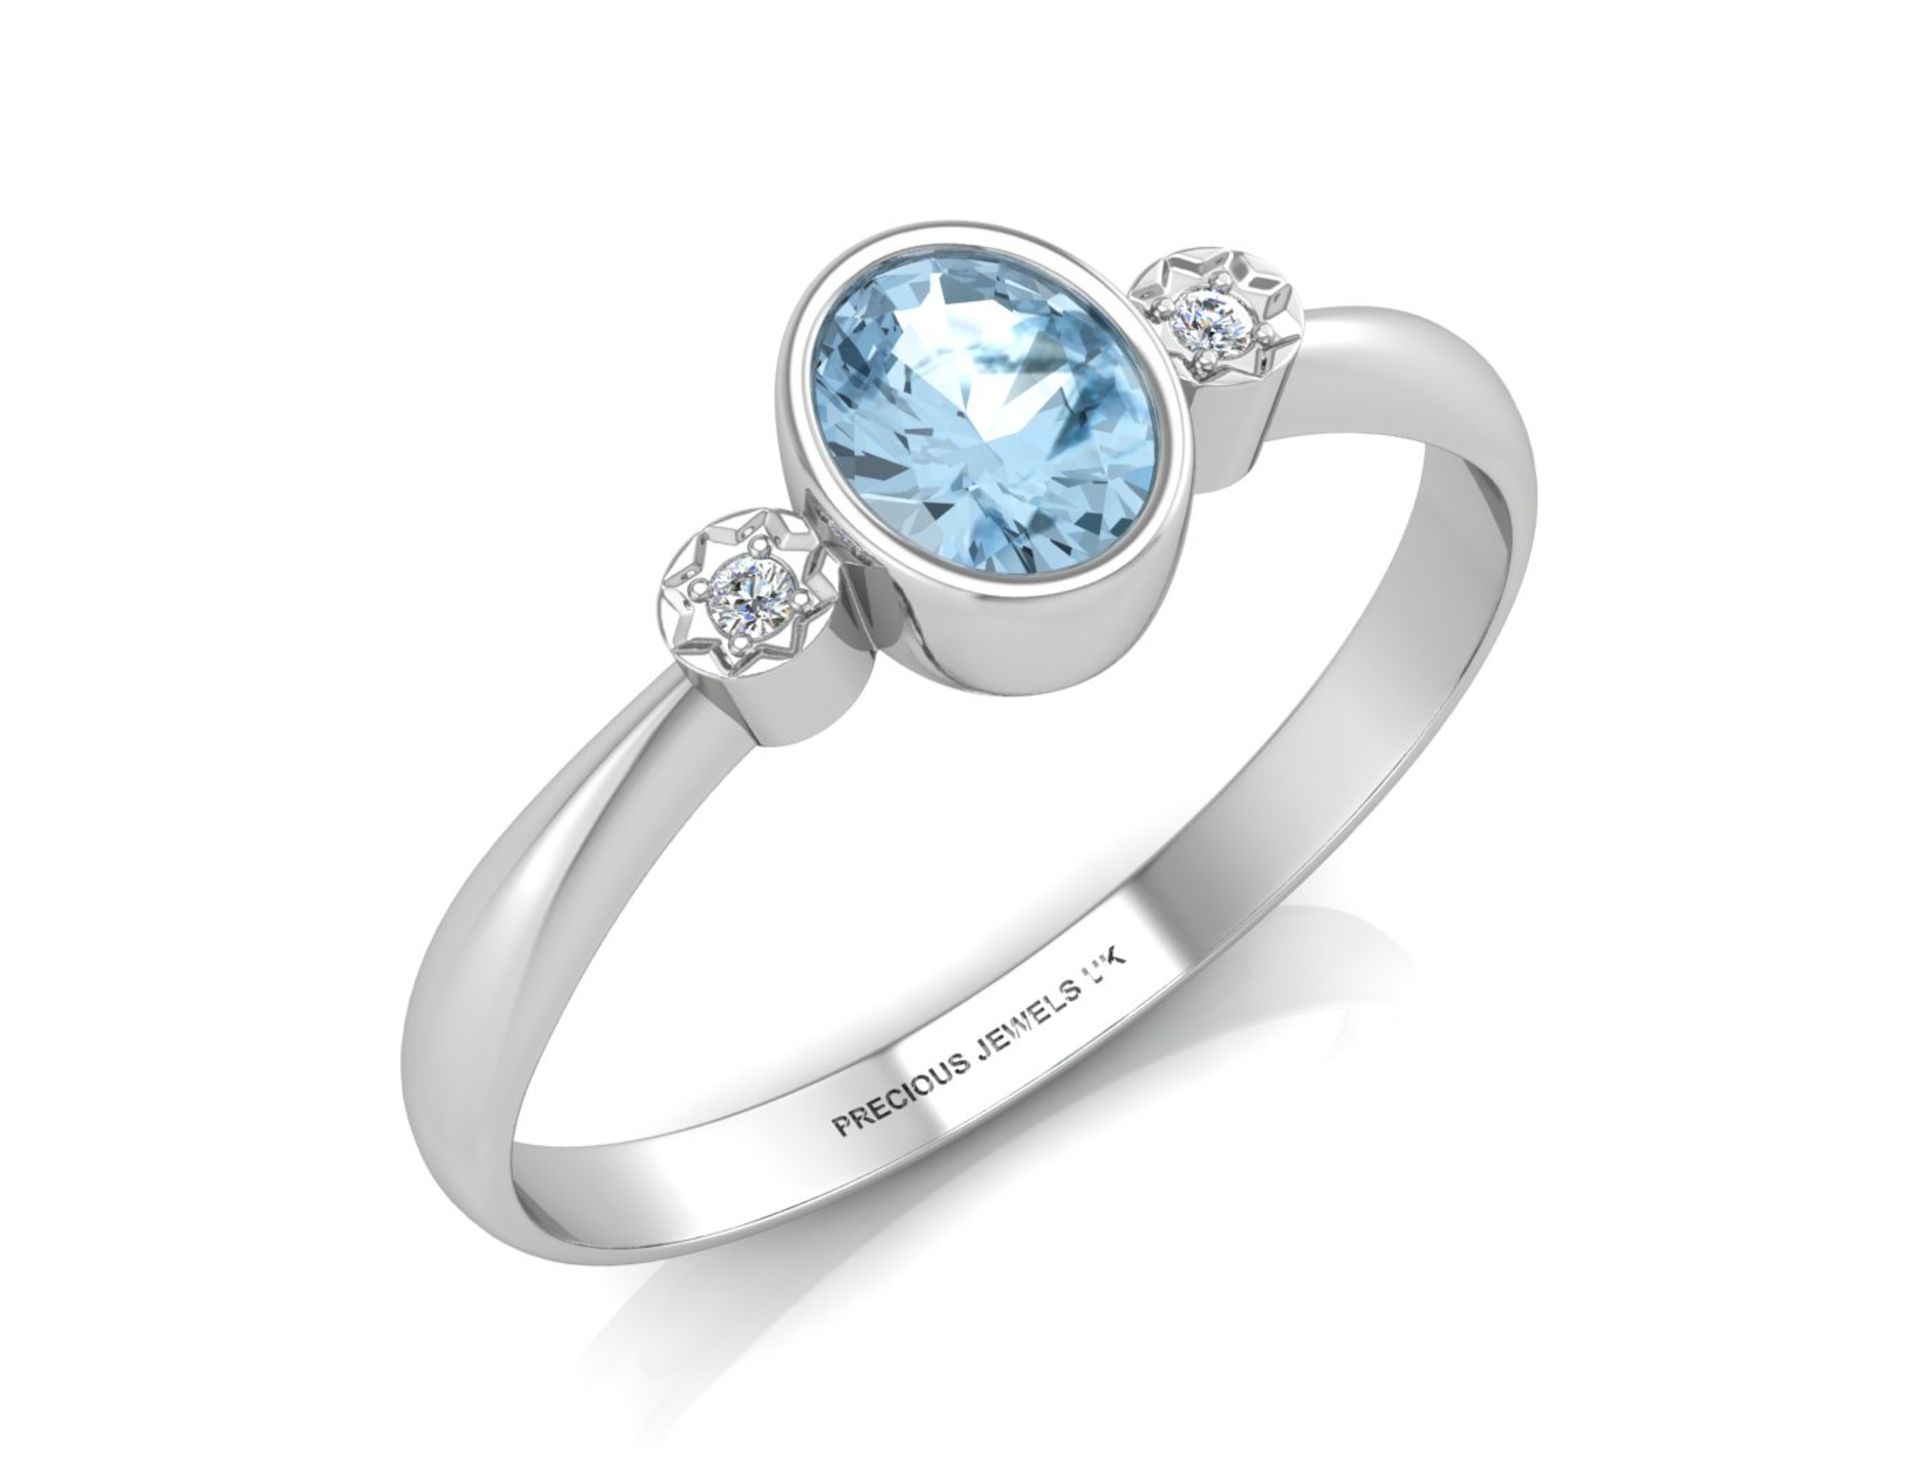 9ct White Gold Shoulder Set Diamond And Blue Topaz (BT0.50) Ring 0.01 Carats - Valued By GIE £905.00